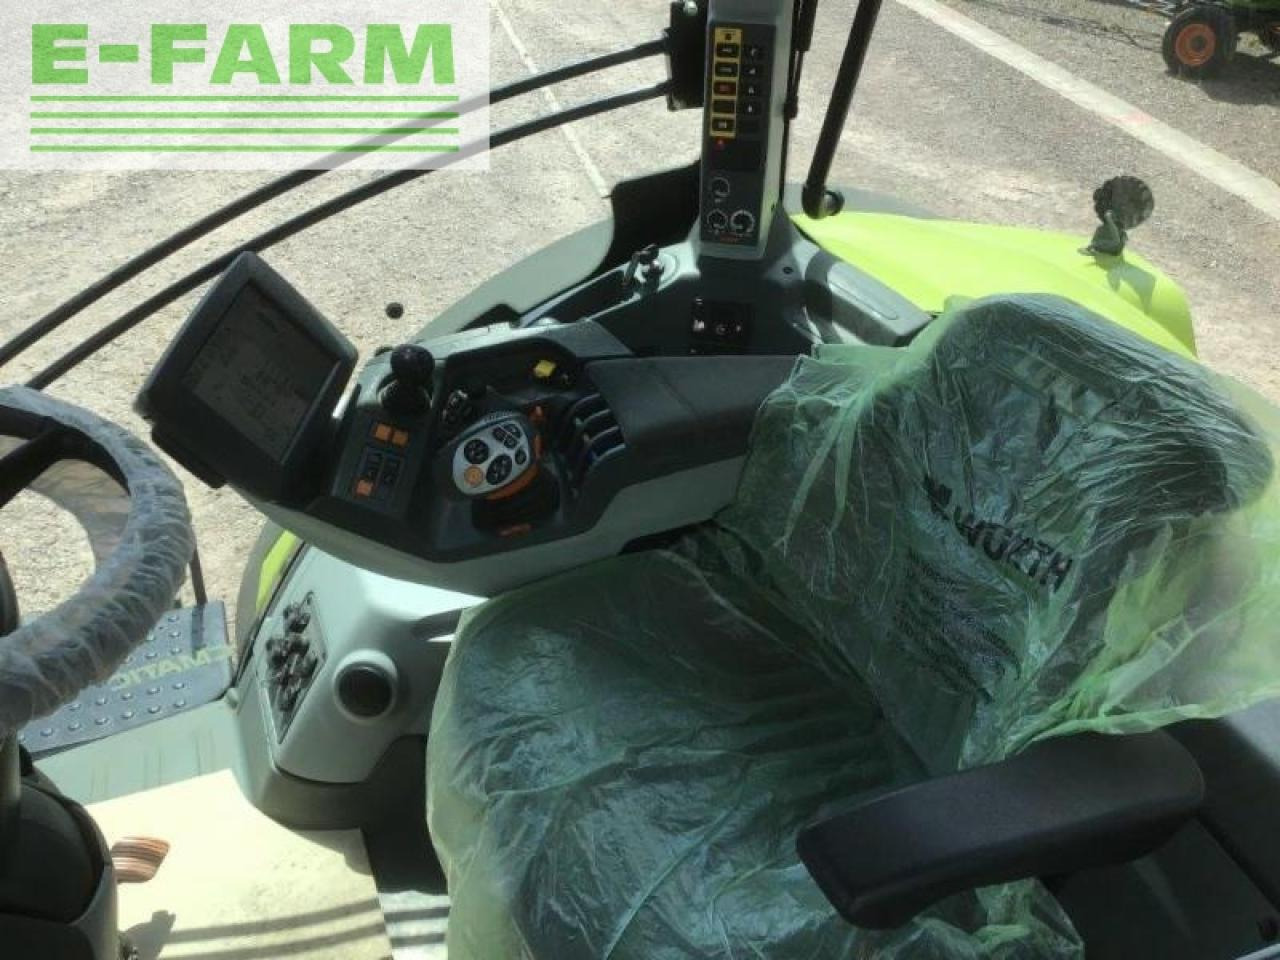 Tractor CLAAS axion 850 c-matic